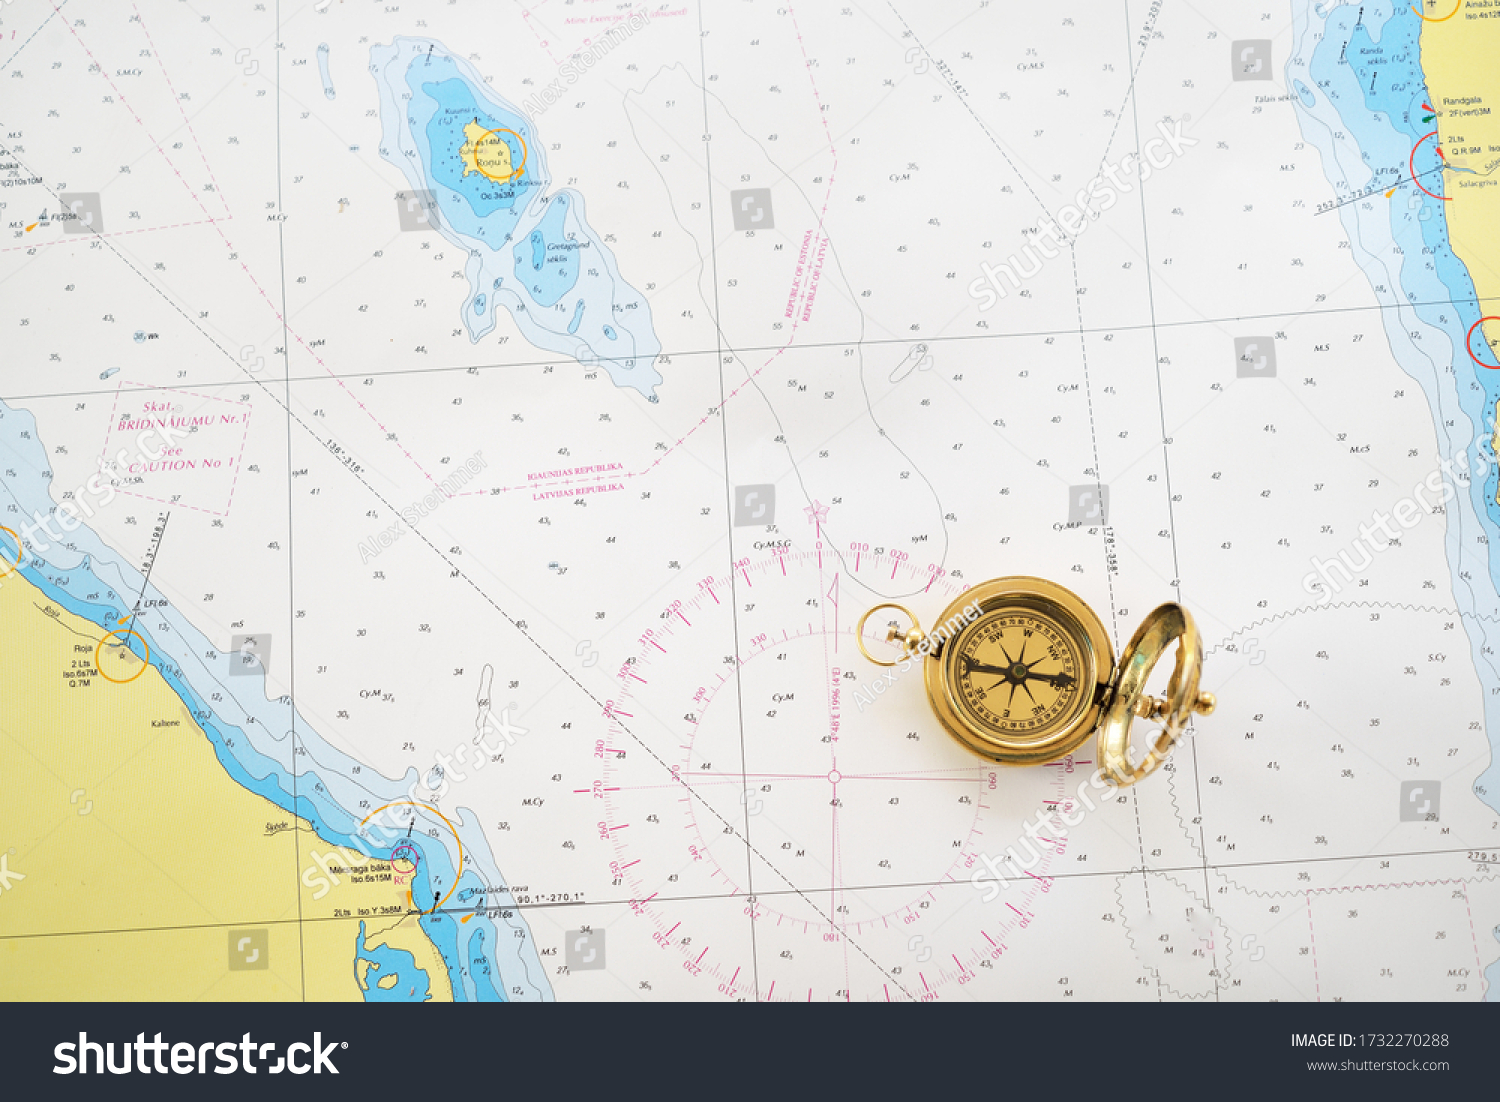 Retro styled golden compass (sundial) and old white nautical chart close-up. Vintage still life. Sailing accessories. Travel and navigation theme #1732270288